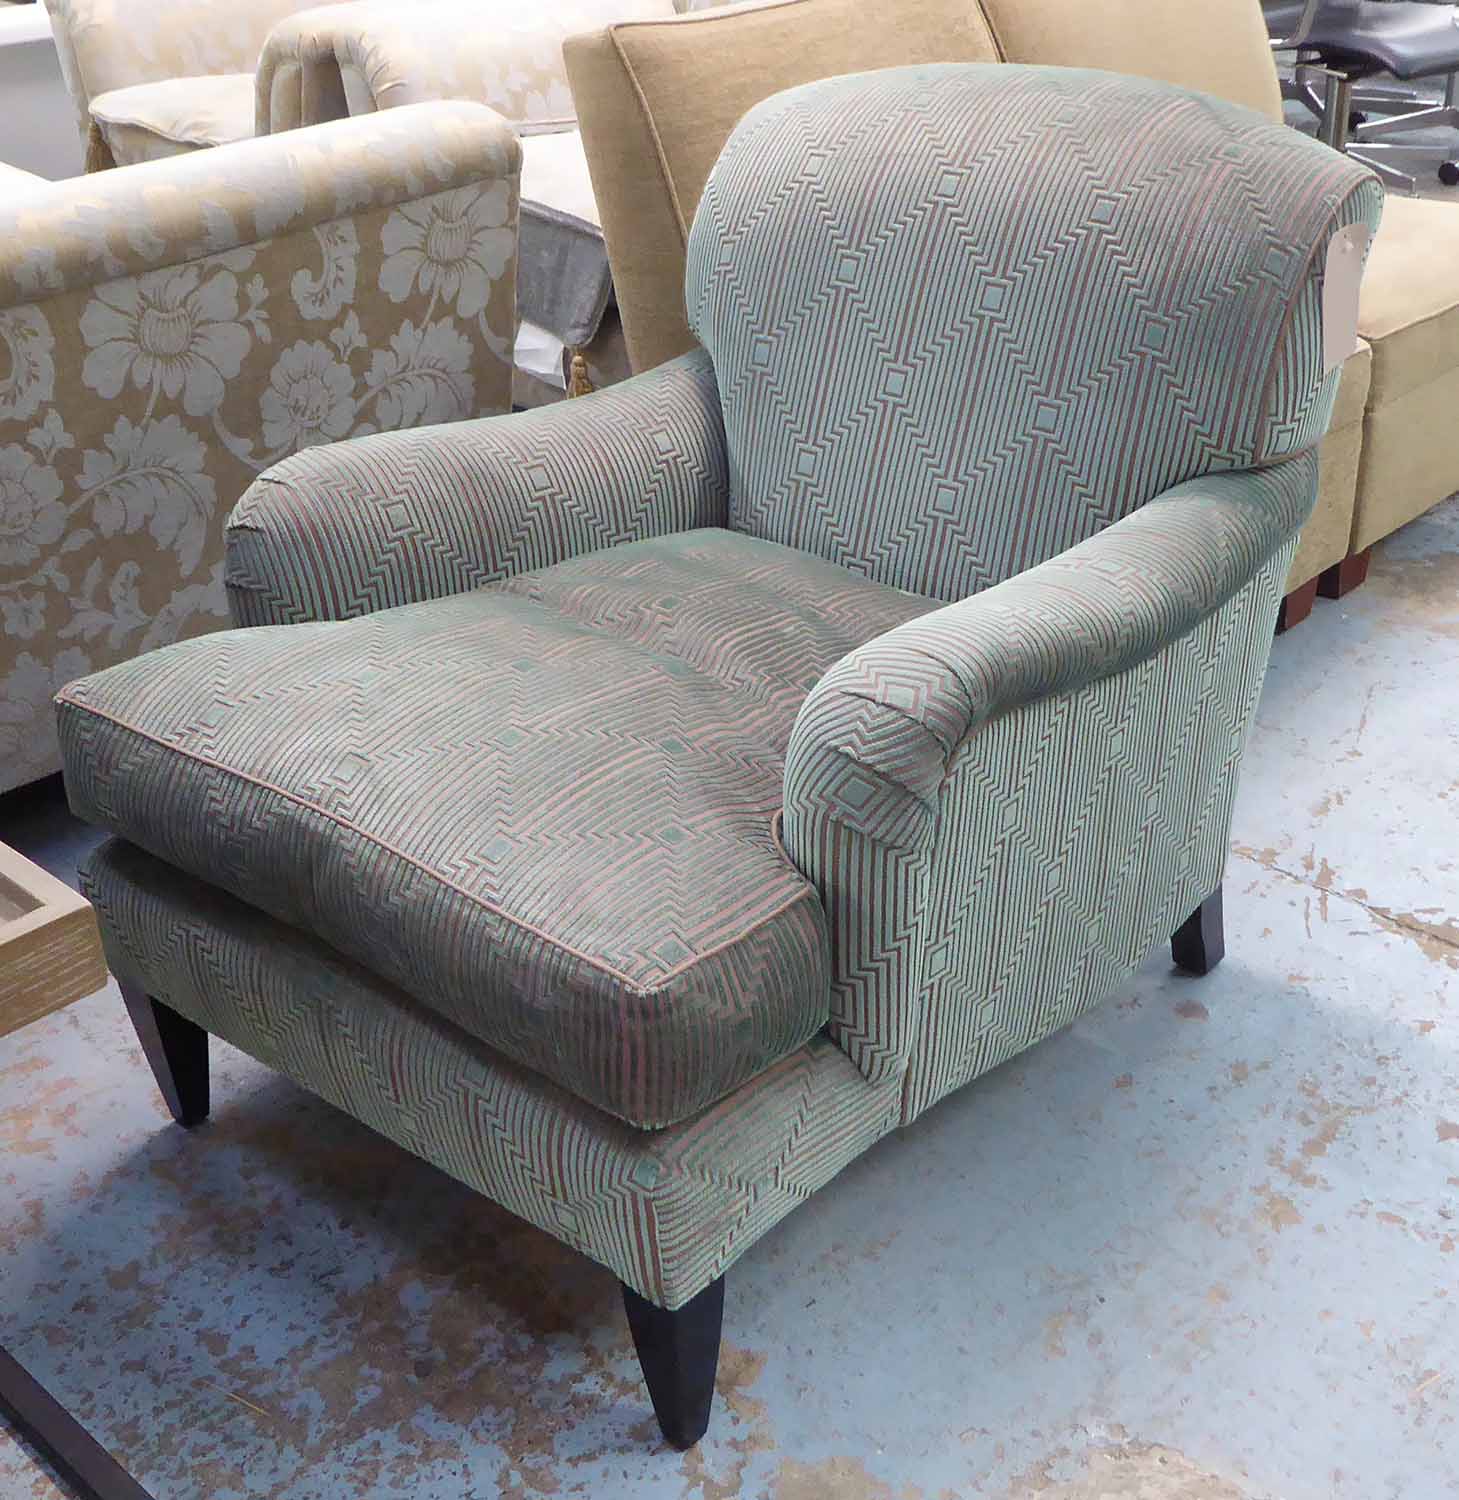 WILLIAM YEOWARD ARMCHAIR, with turquoise and brown striped geometric patterned upholstery,